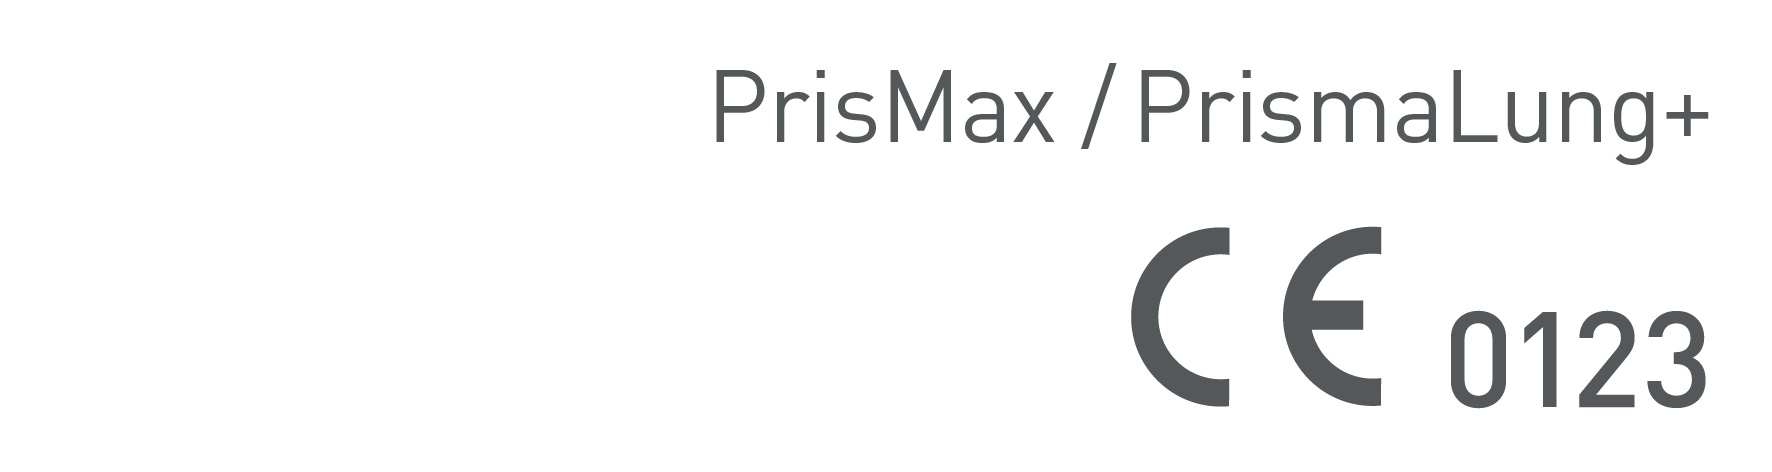 PrisMax and Prismalung+